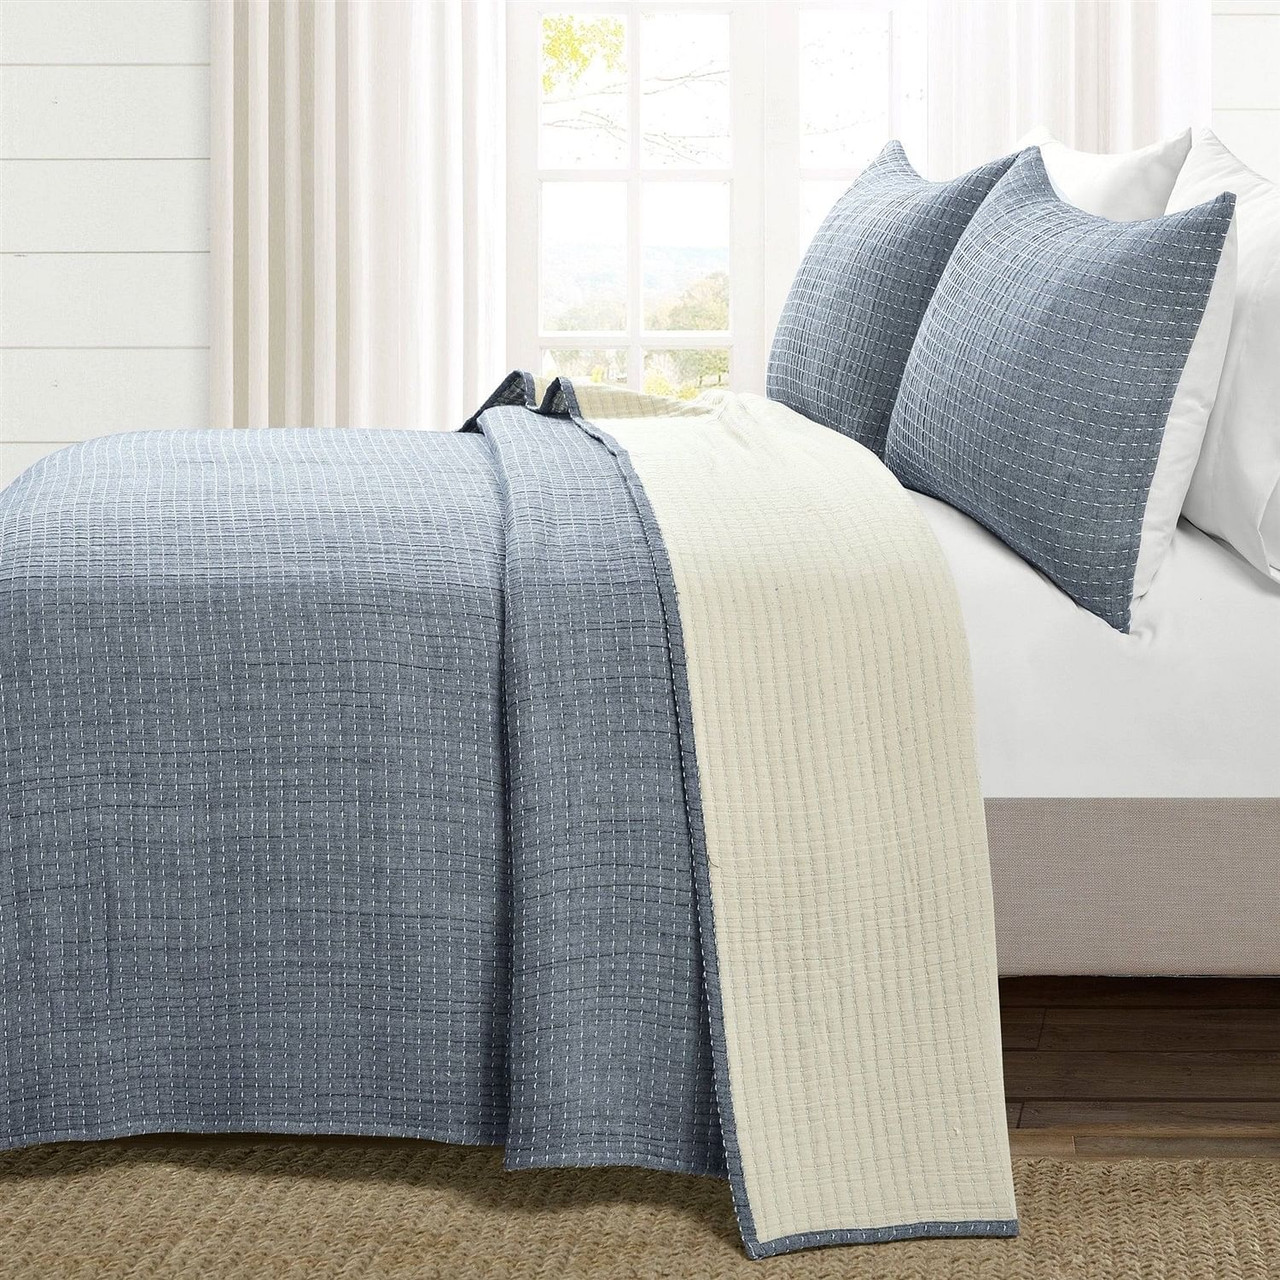 King Size 3-Piece Reversible Woven Cotton Quilt Set in Navy Cream